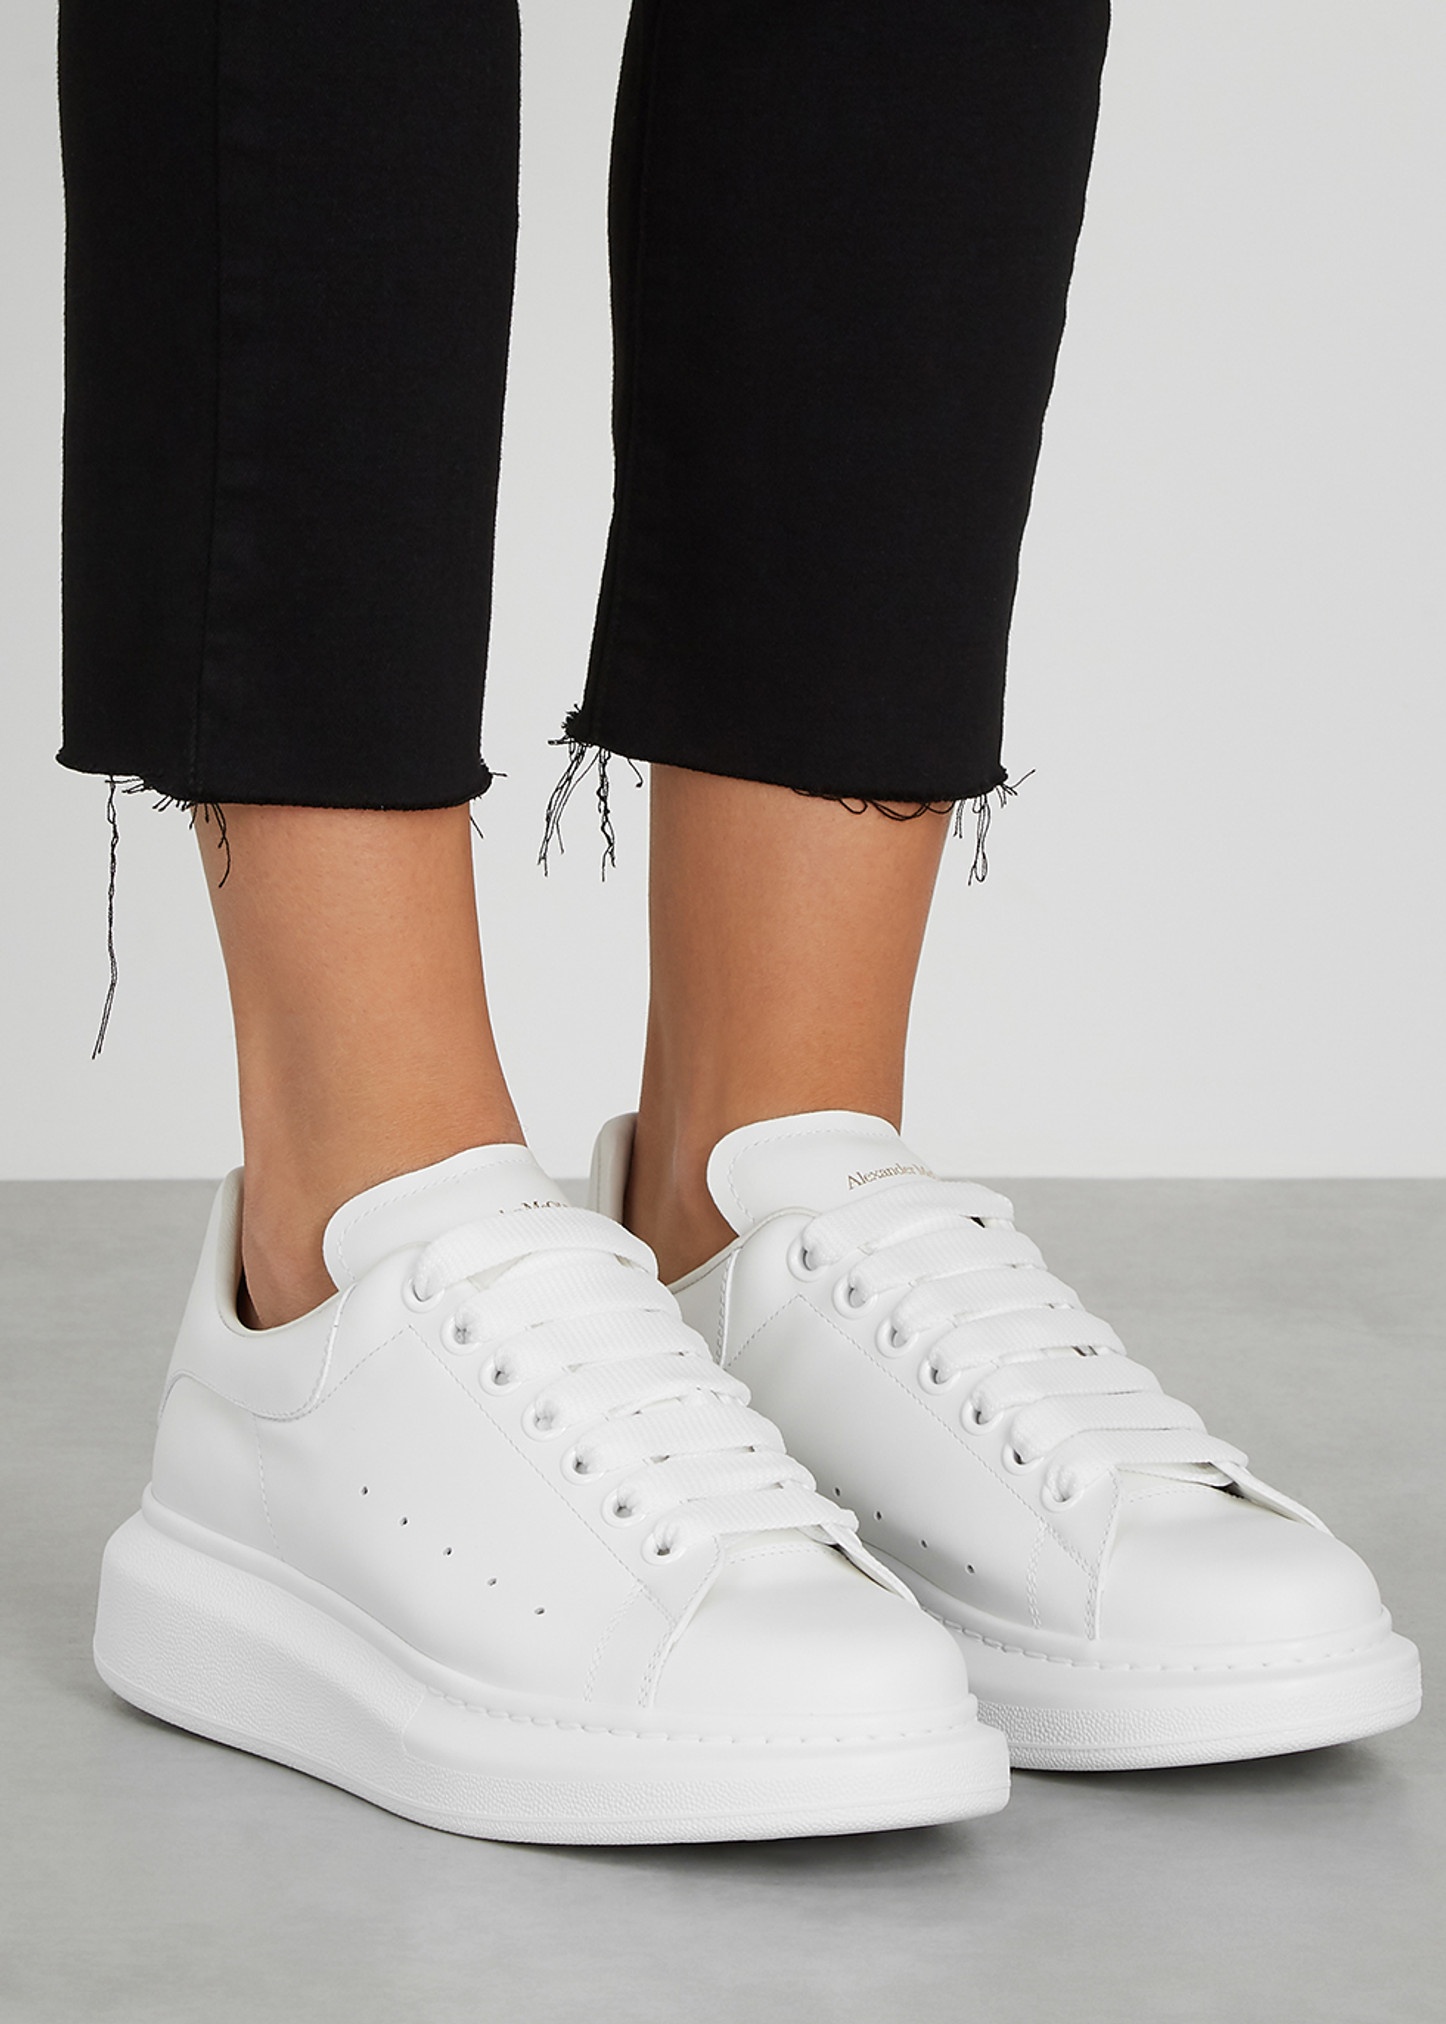 Oversized white leather sneakers - 5